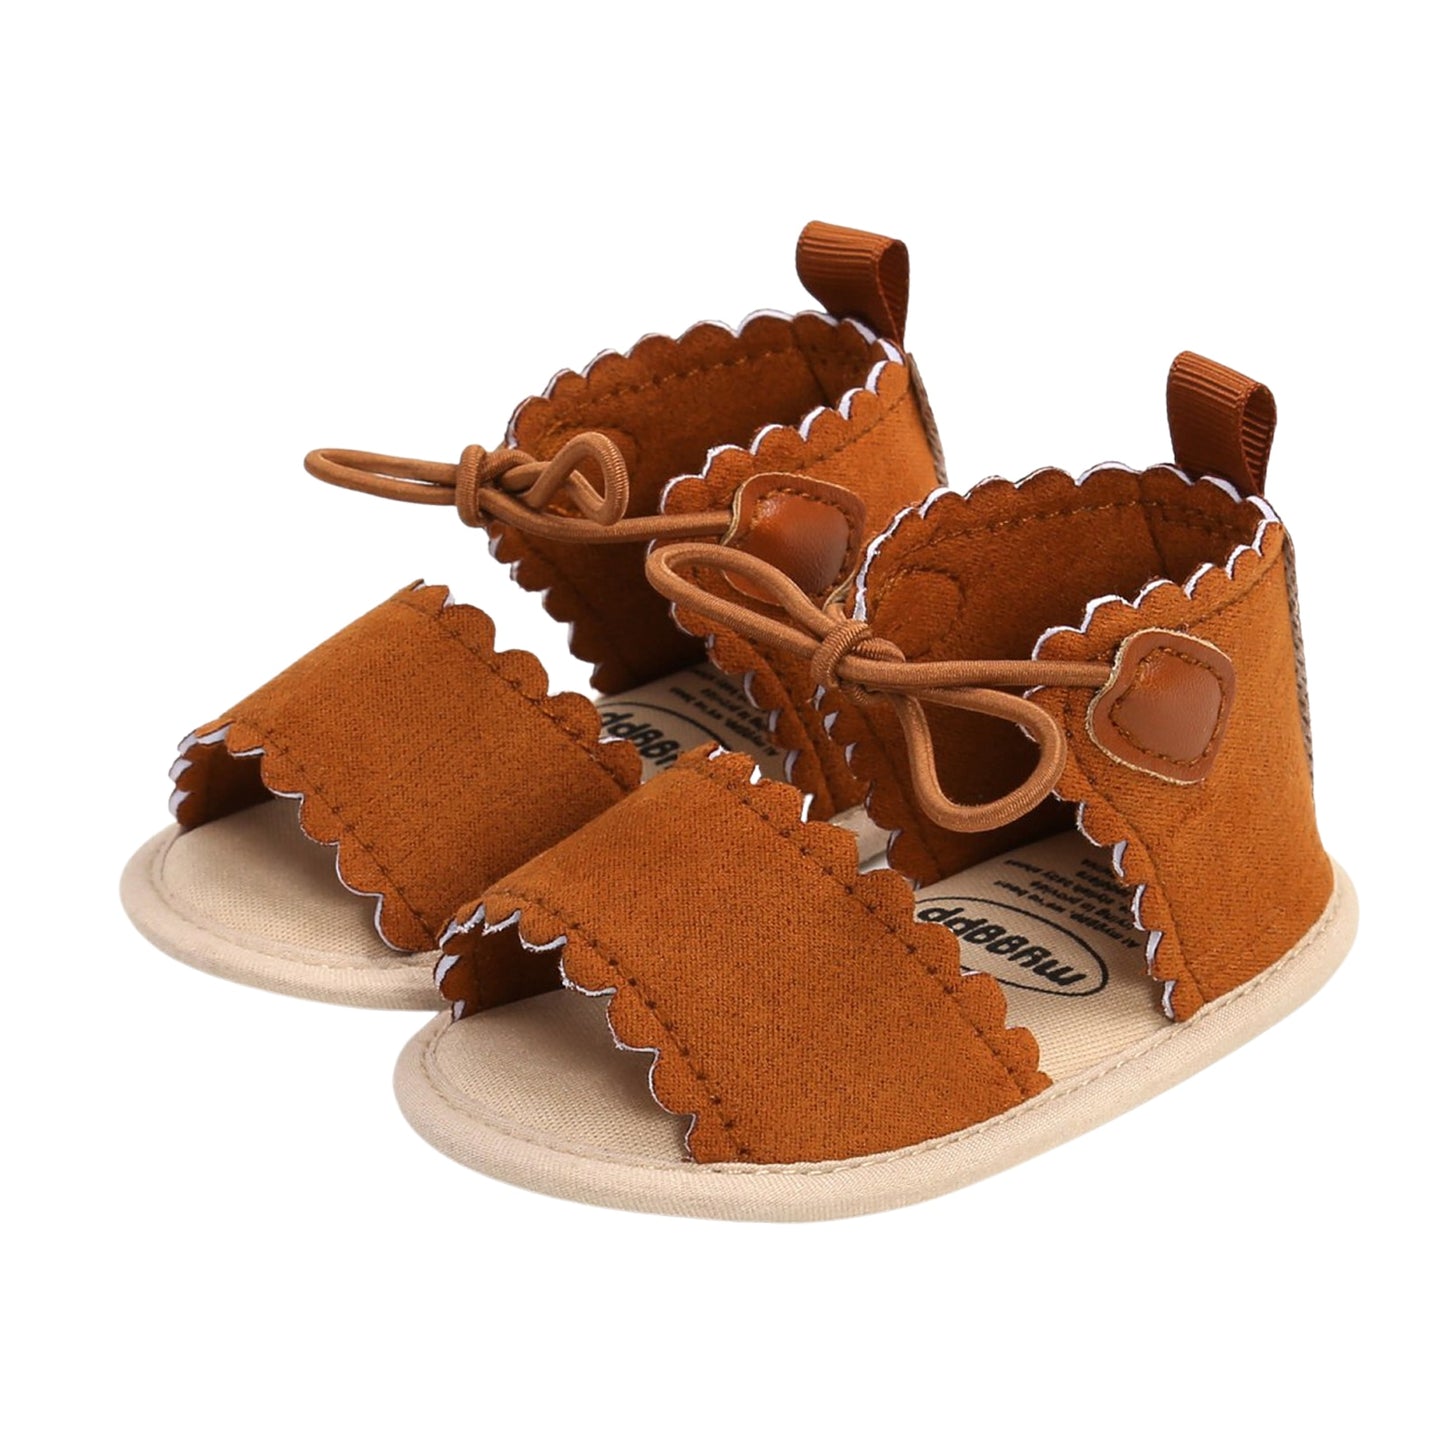 Soft Sole Sandals With Headband